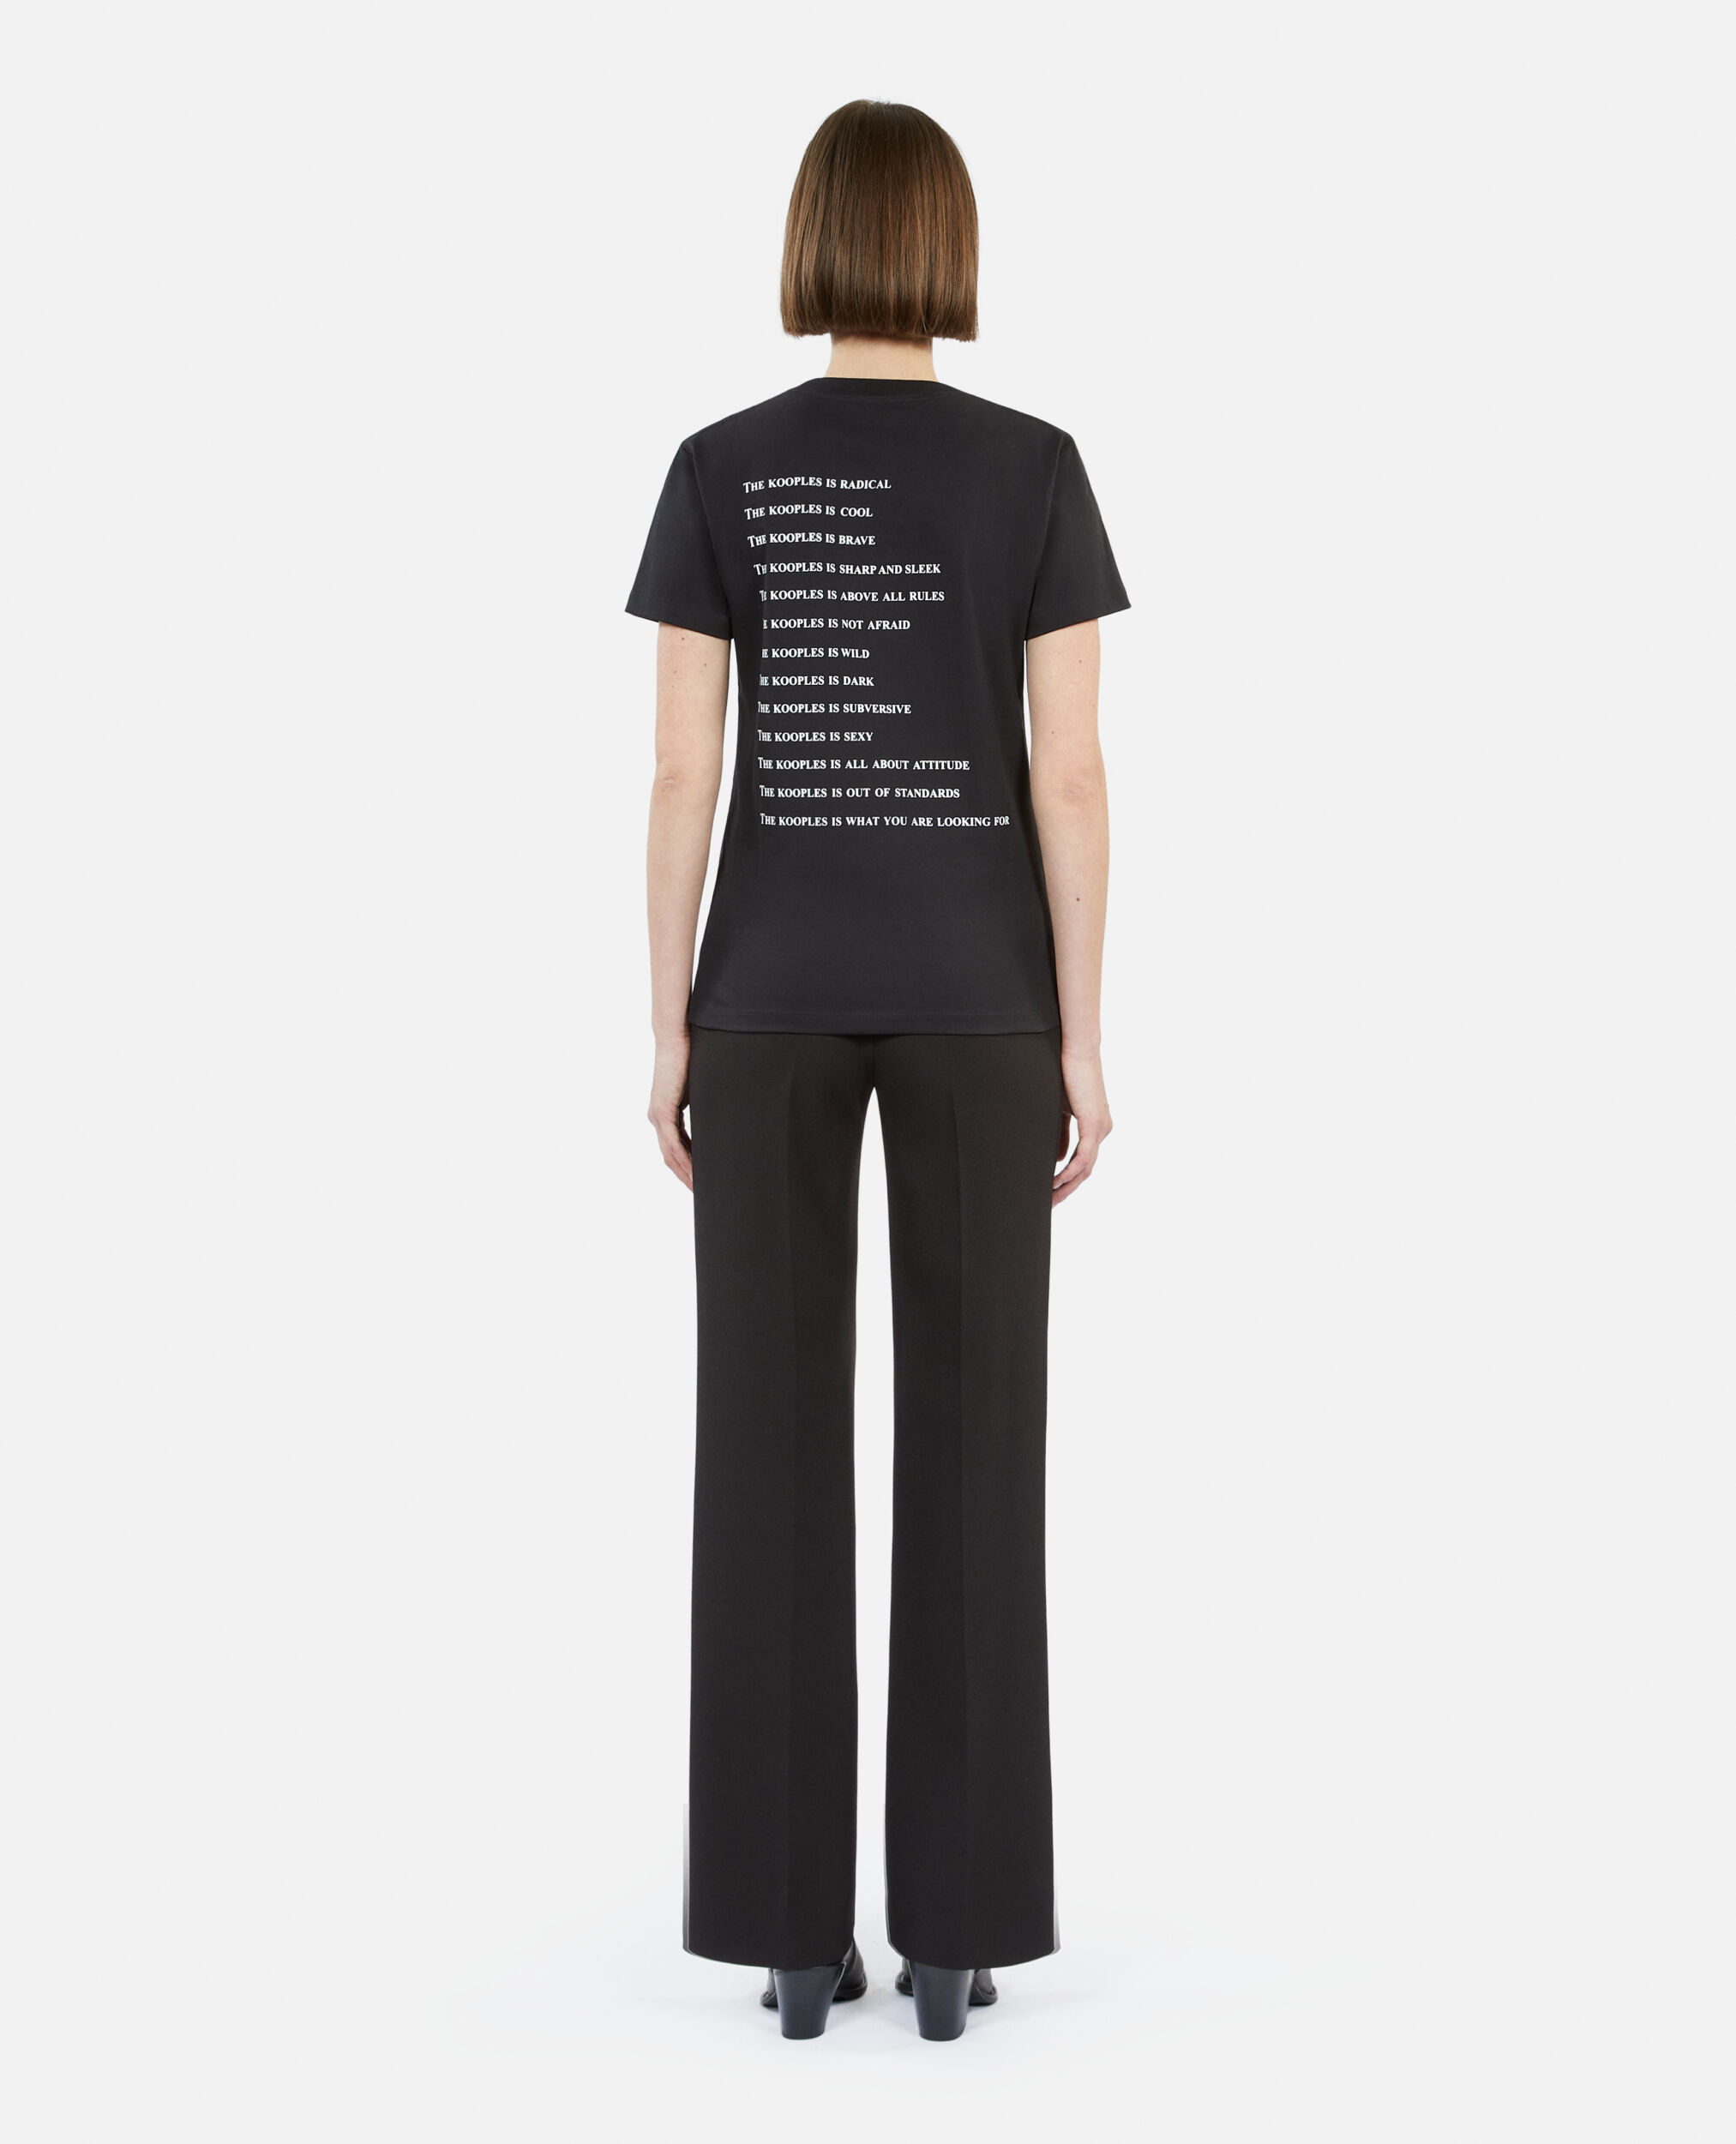 Camiseta strass What is negra para mujer, BLACK, hi-res image number null